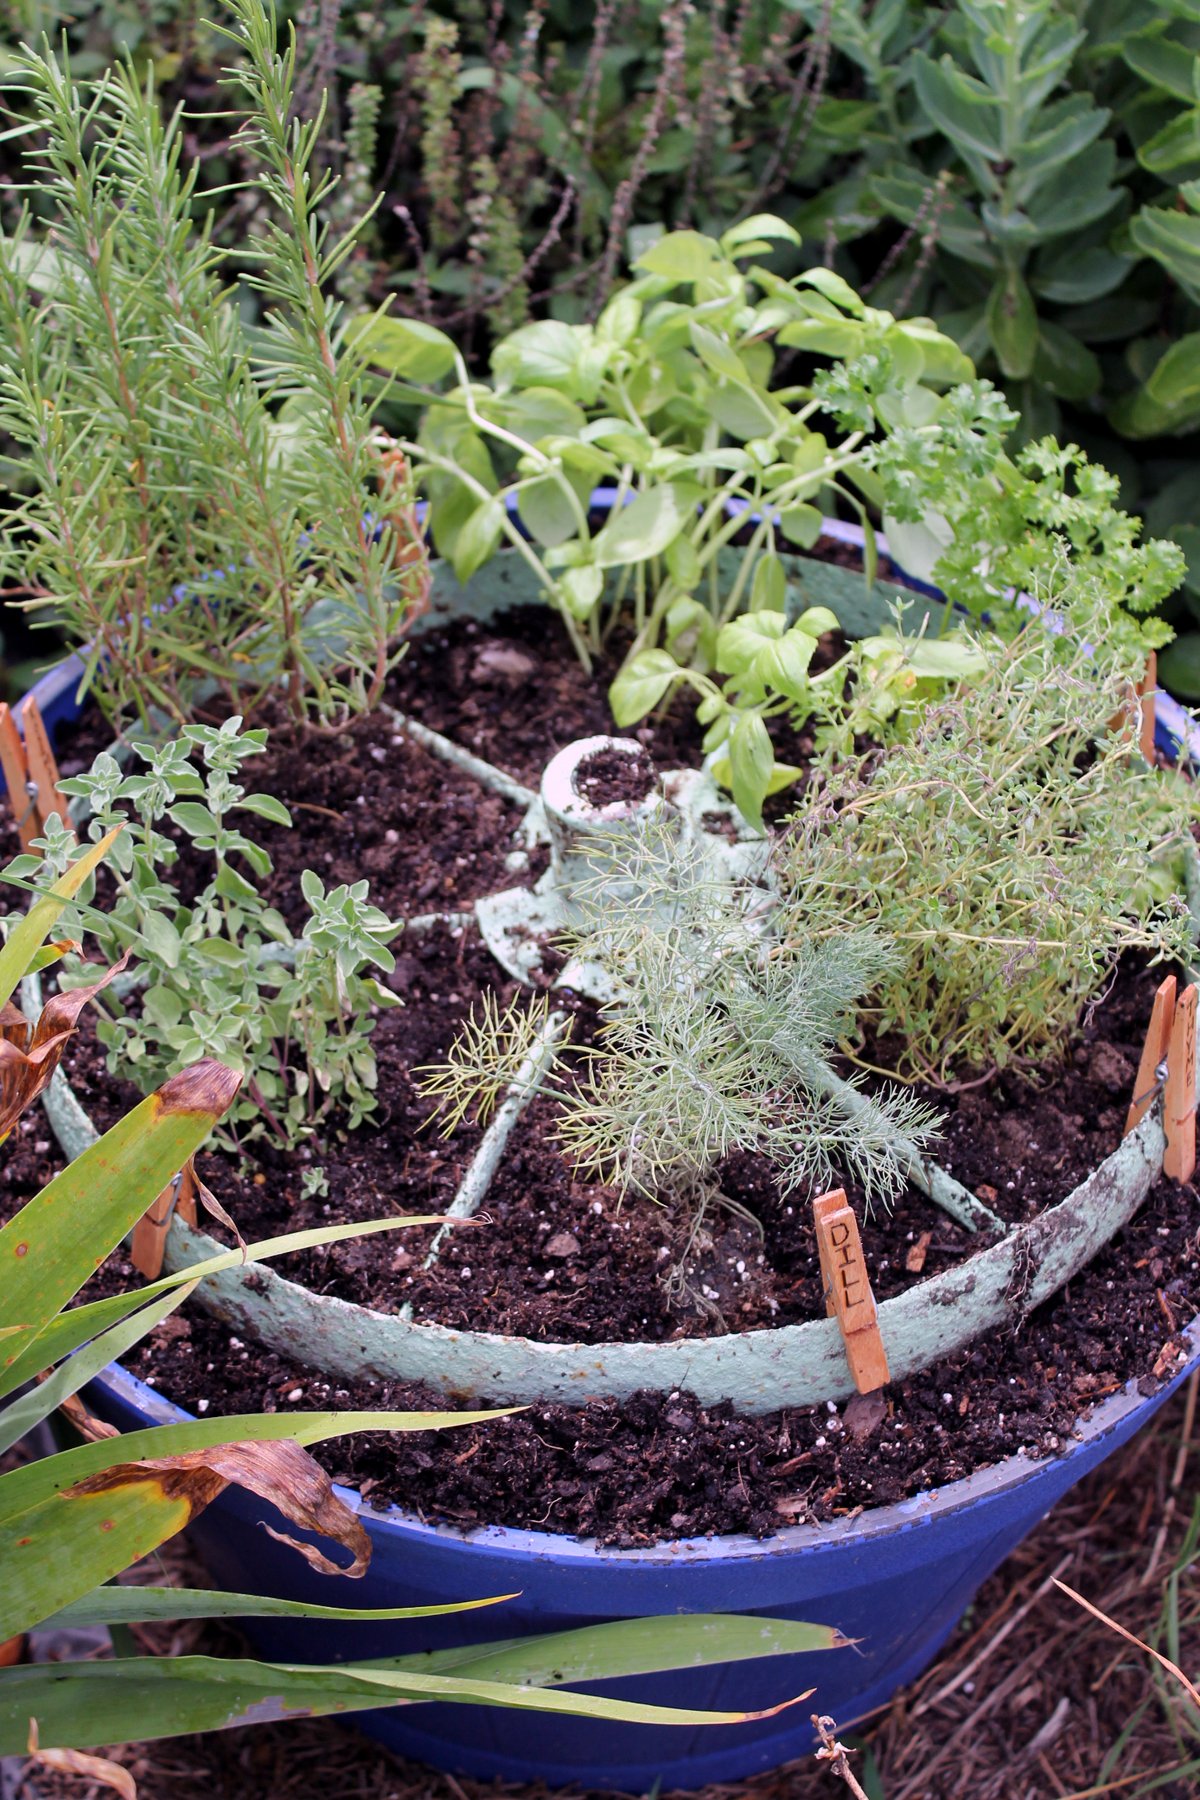 Herb garden design - make a rustic herb garden with an old wheel! Plus instructions on making clothespin herb markers!